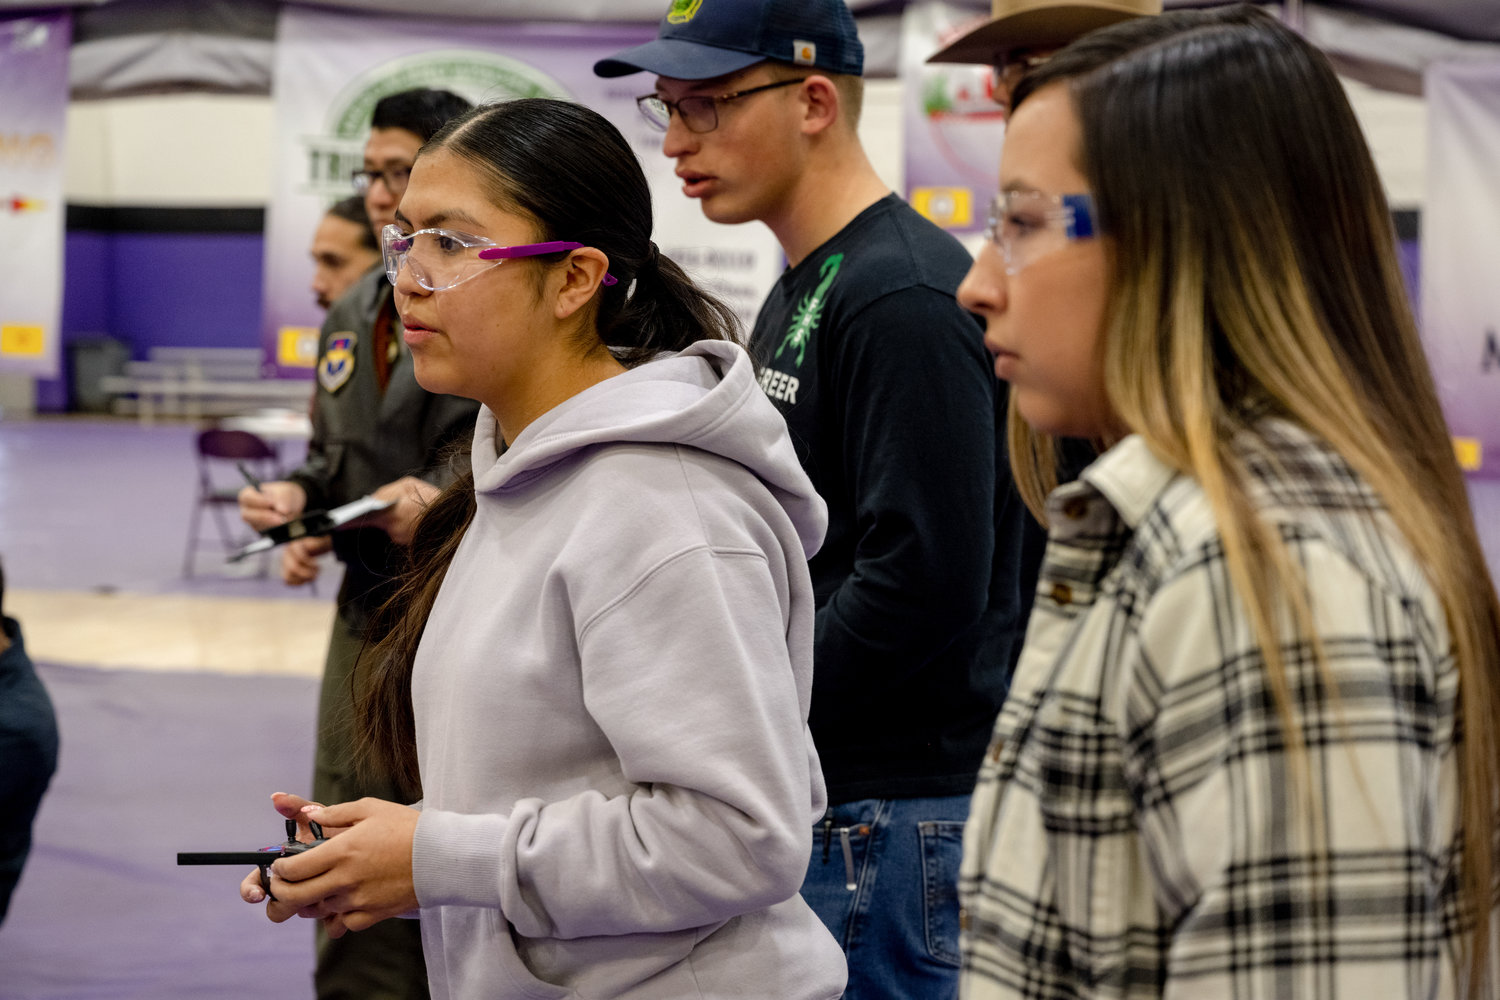 Paisley Pike, left, and Damaris Lent, Mescalero Apache High School students, navigate their drone through an obstacle course during the first Aerial Drone Competition at Mescalero Apache High School, Jan. 21, 2023. The 29th ATKS has had a long-running relationship with the Mescalero Apache tribe, using their Mascot the “Ghost Warrior” to affirm the heritage of the Mescalero Apache tribe. (U.S. Air Force photo by Senior Airman Antonio Salfran)